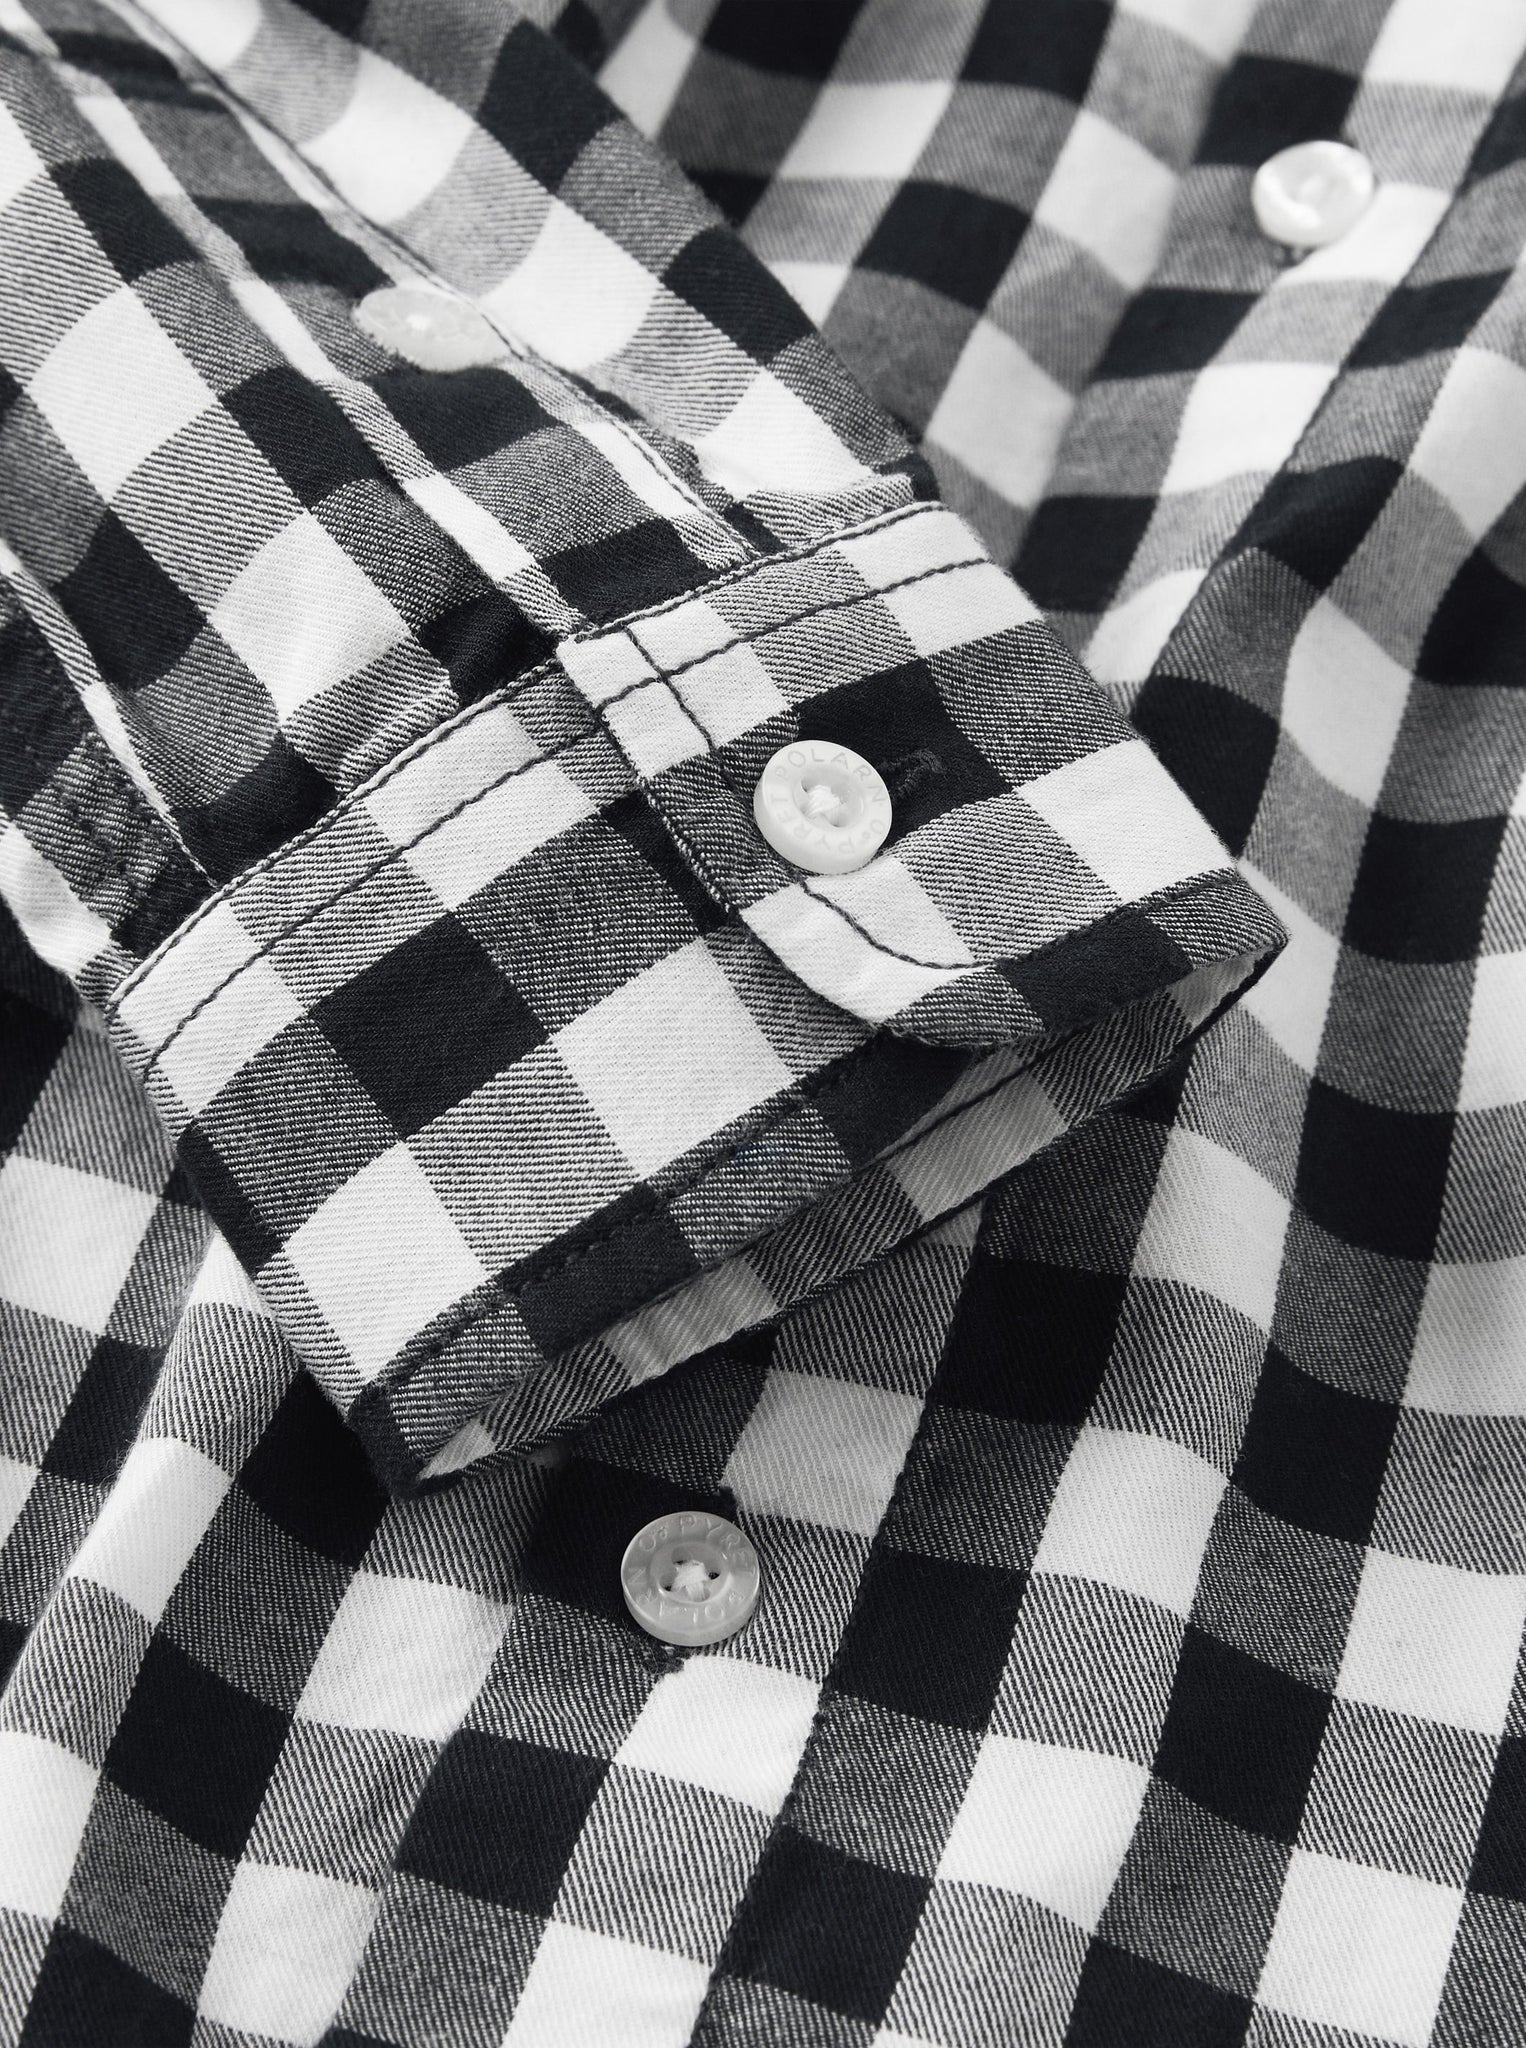 Organic Cotton Checked Kids Shirt from the Polarn O. Pyret kidswear collection. Clothes made using sustainably sourced materials.